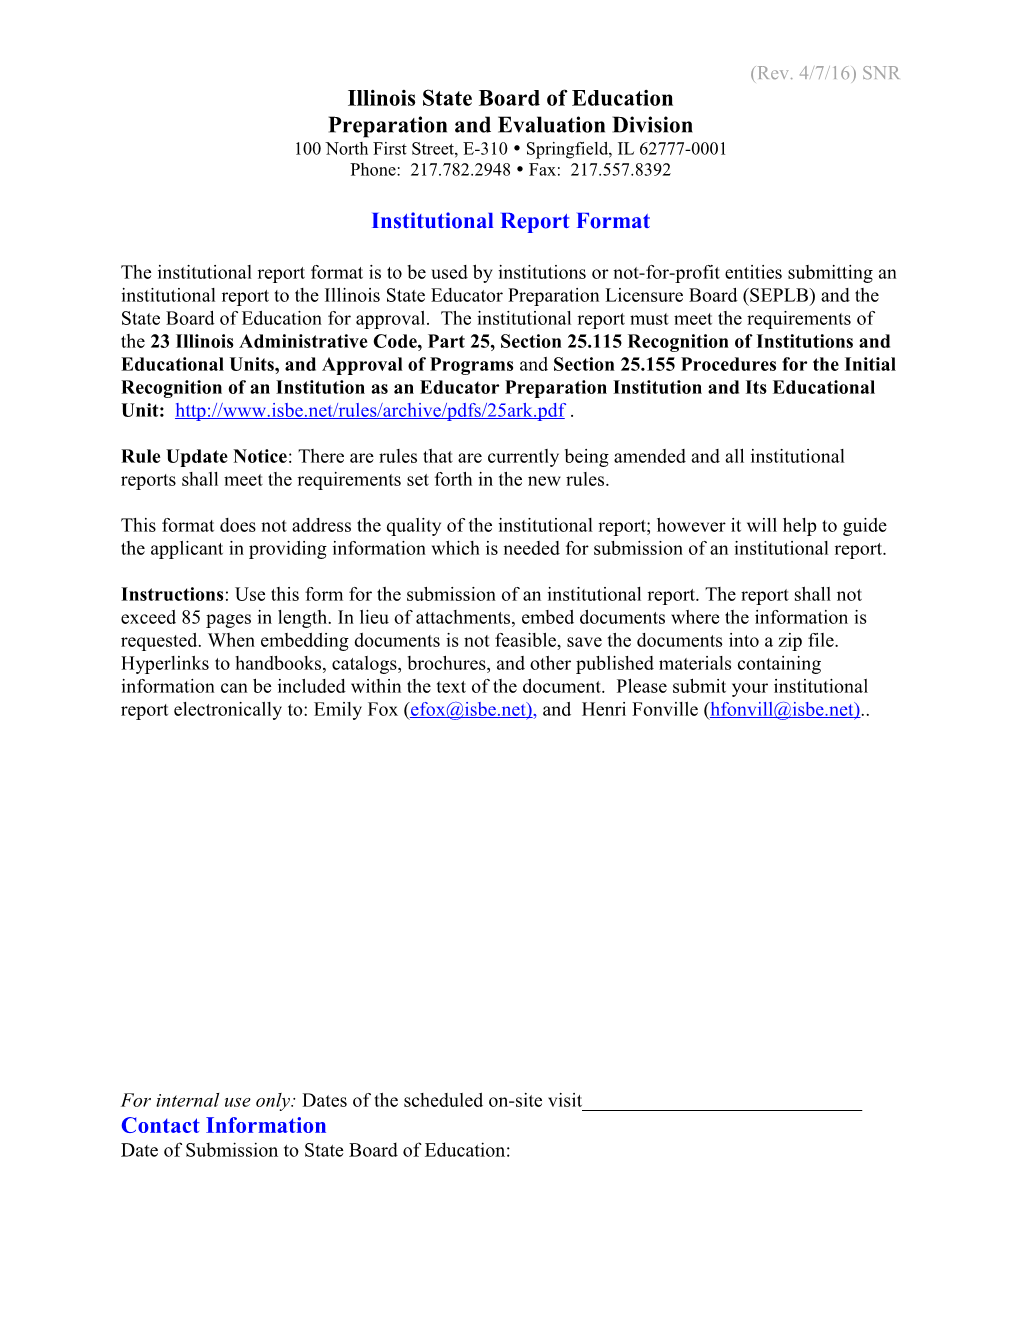 ISBE Institutional Report - Content and Format